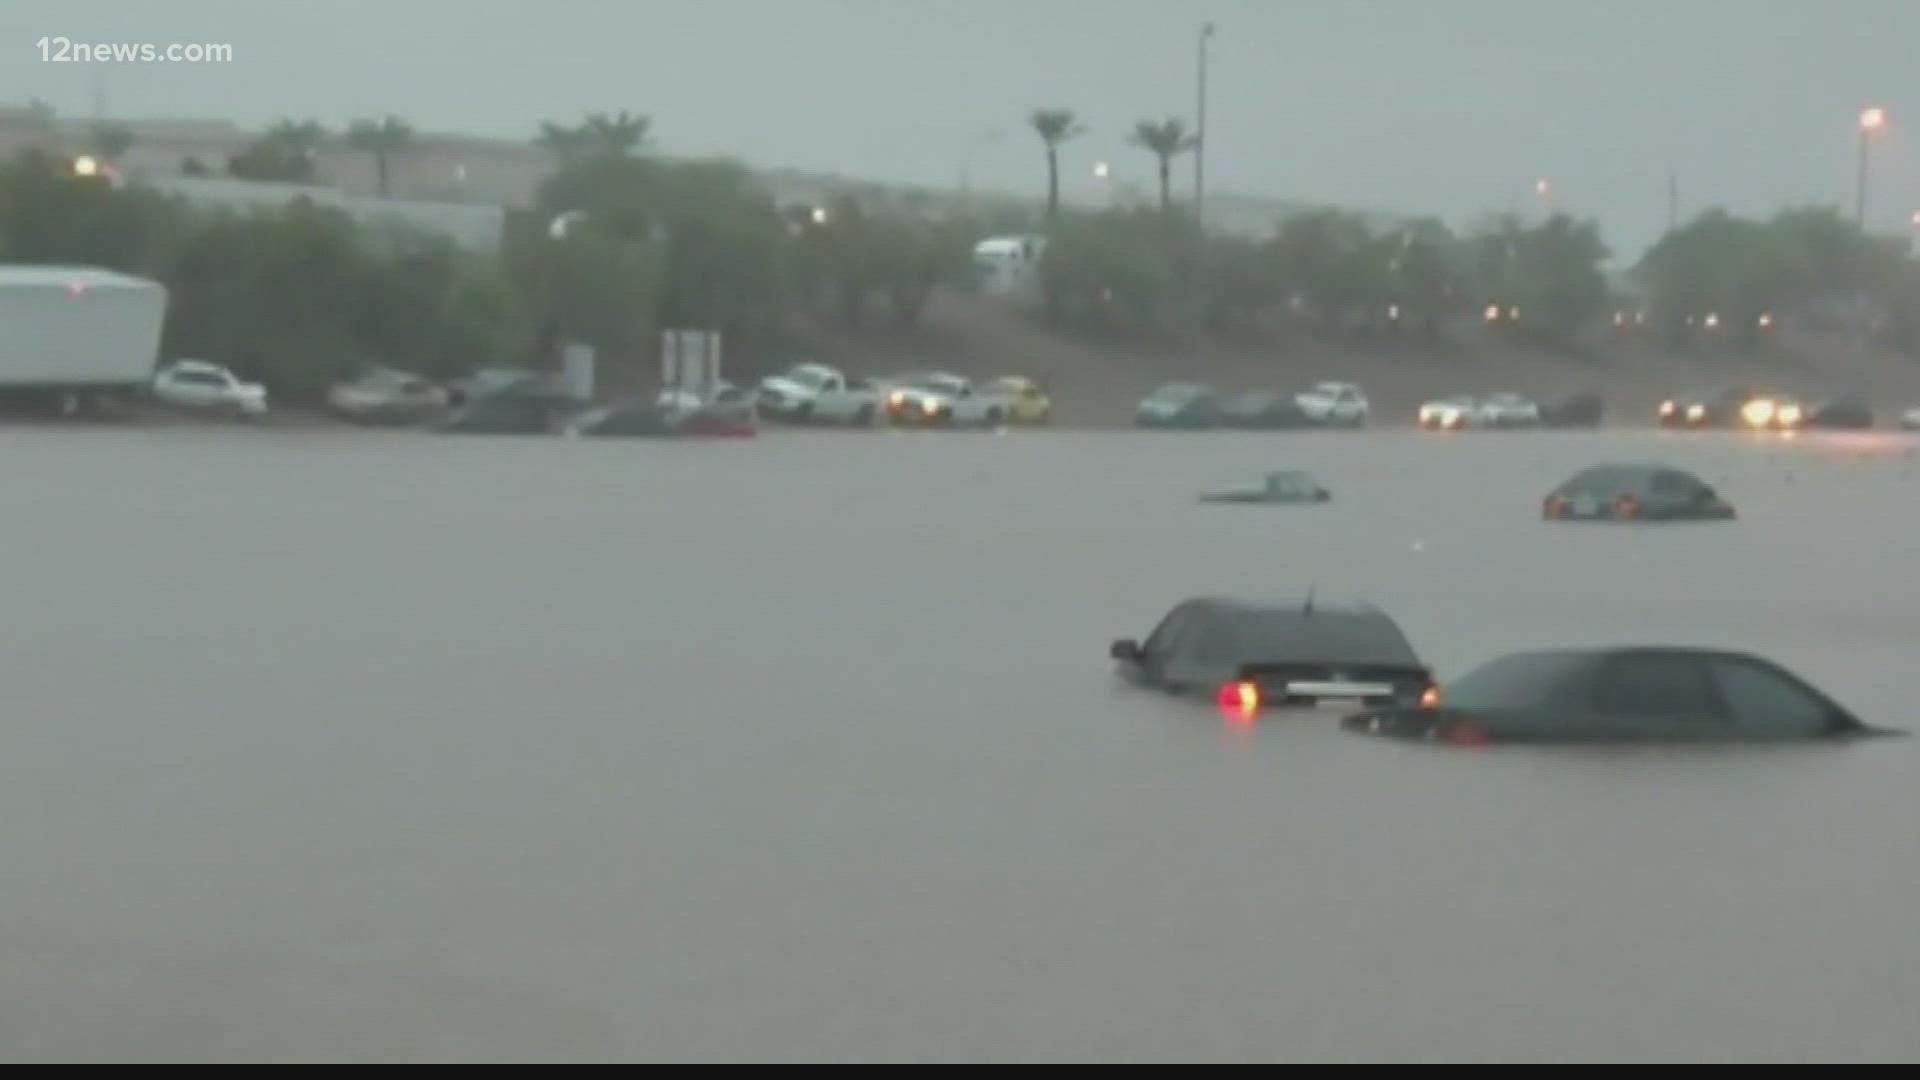 The 2014 storm dumped 3.30 inches of rainfall onto Phoenix in one day, close to 2021's total monsoon rainfall at 3.88 inches.